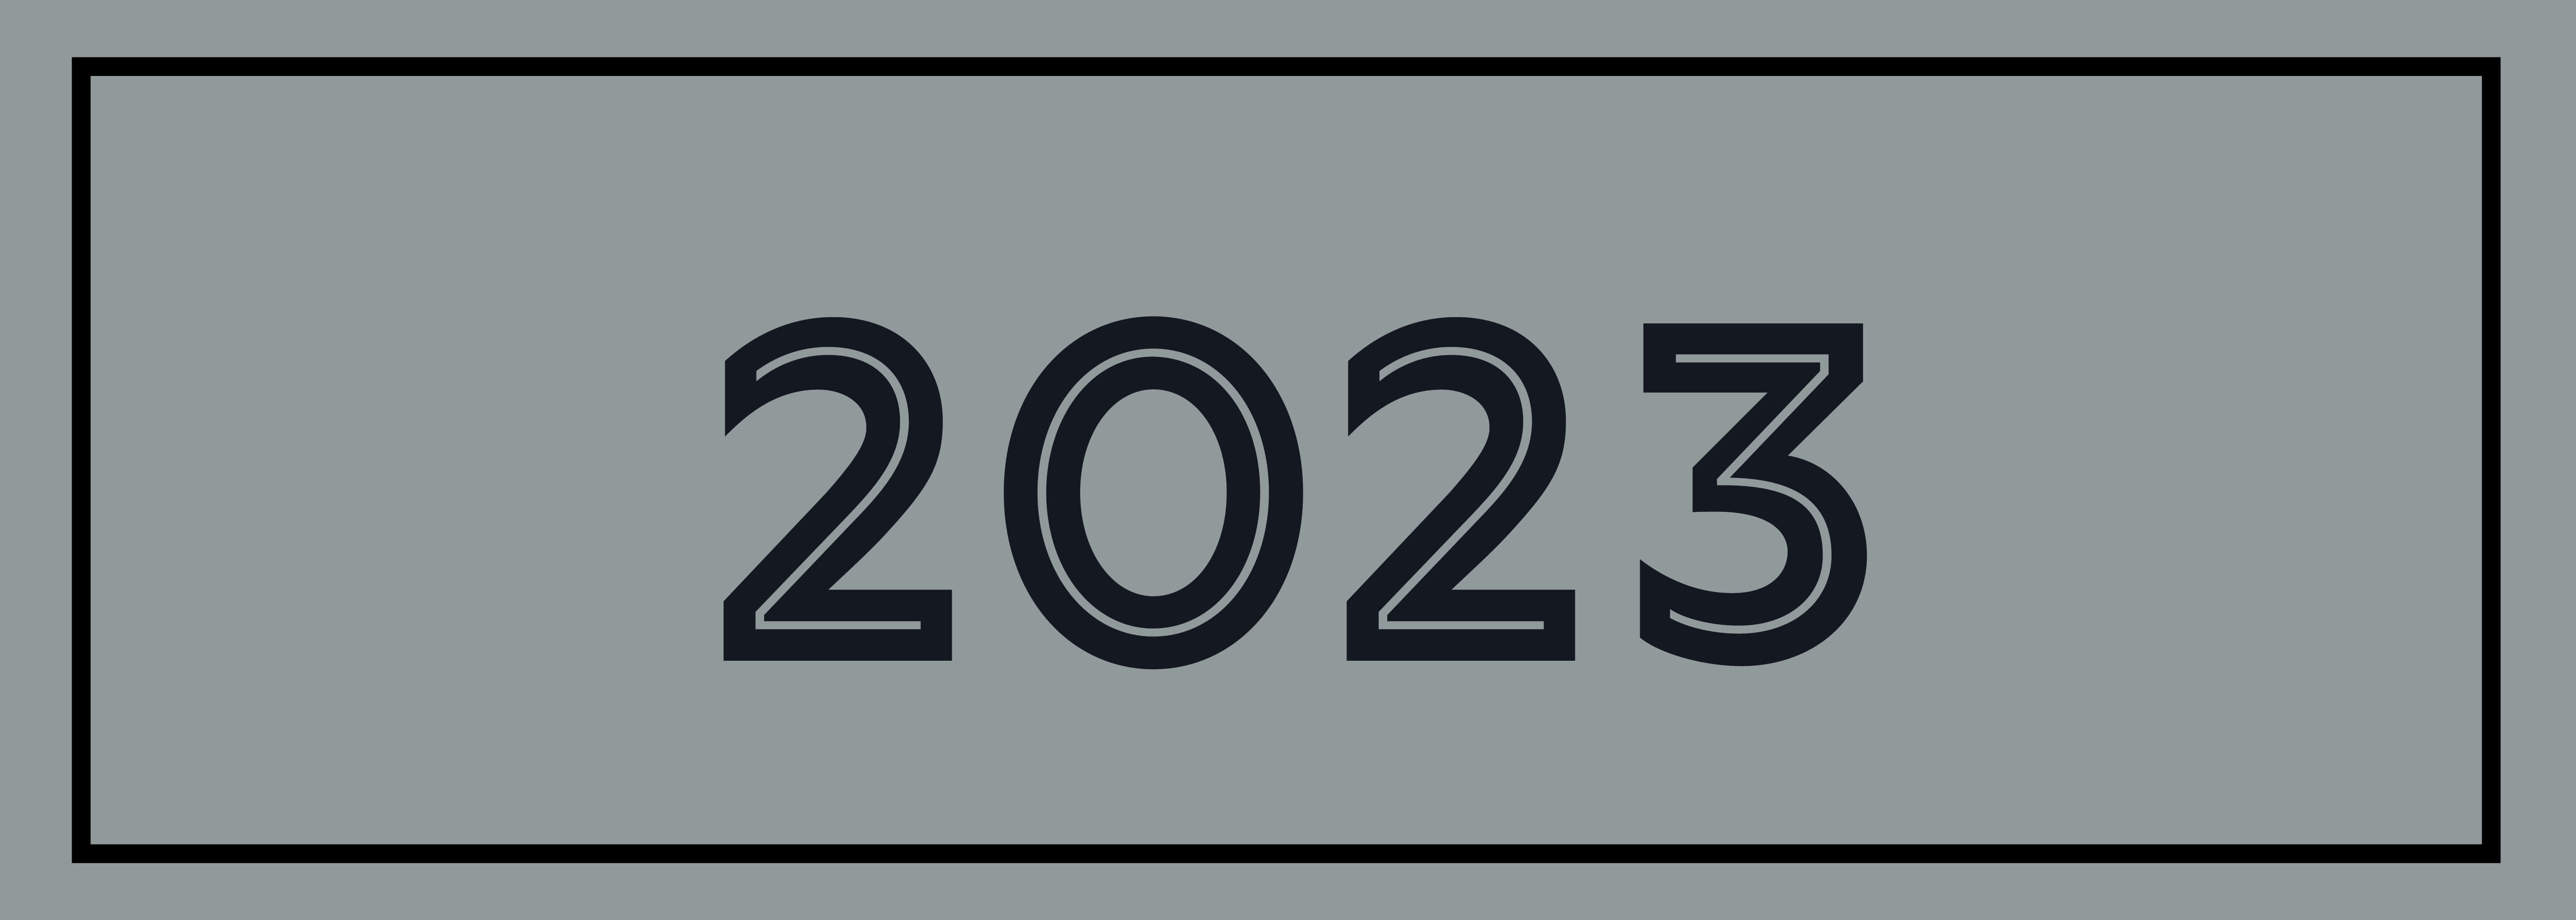 2023 button revised